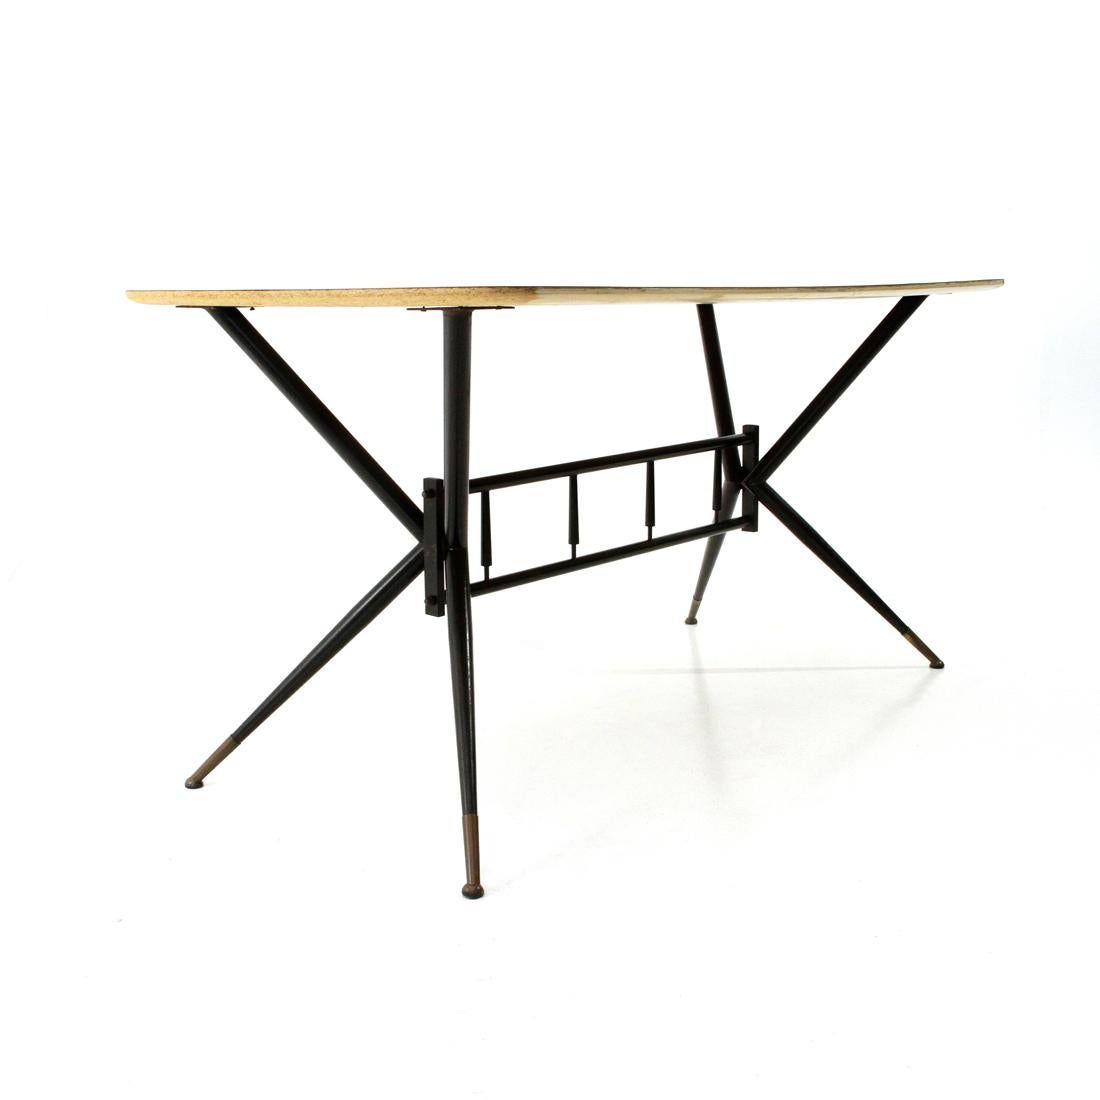 Italian Midcentury Formica and Black Metal Dining Table, 1950s